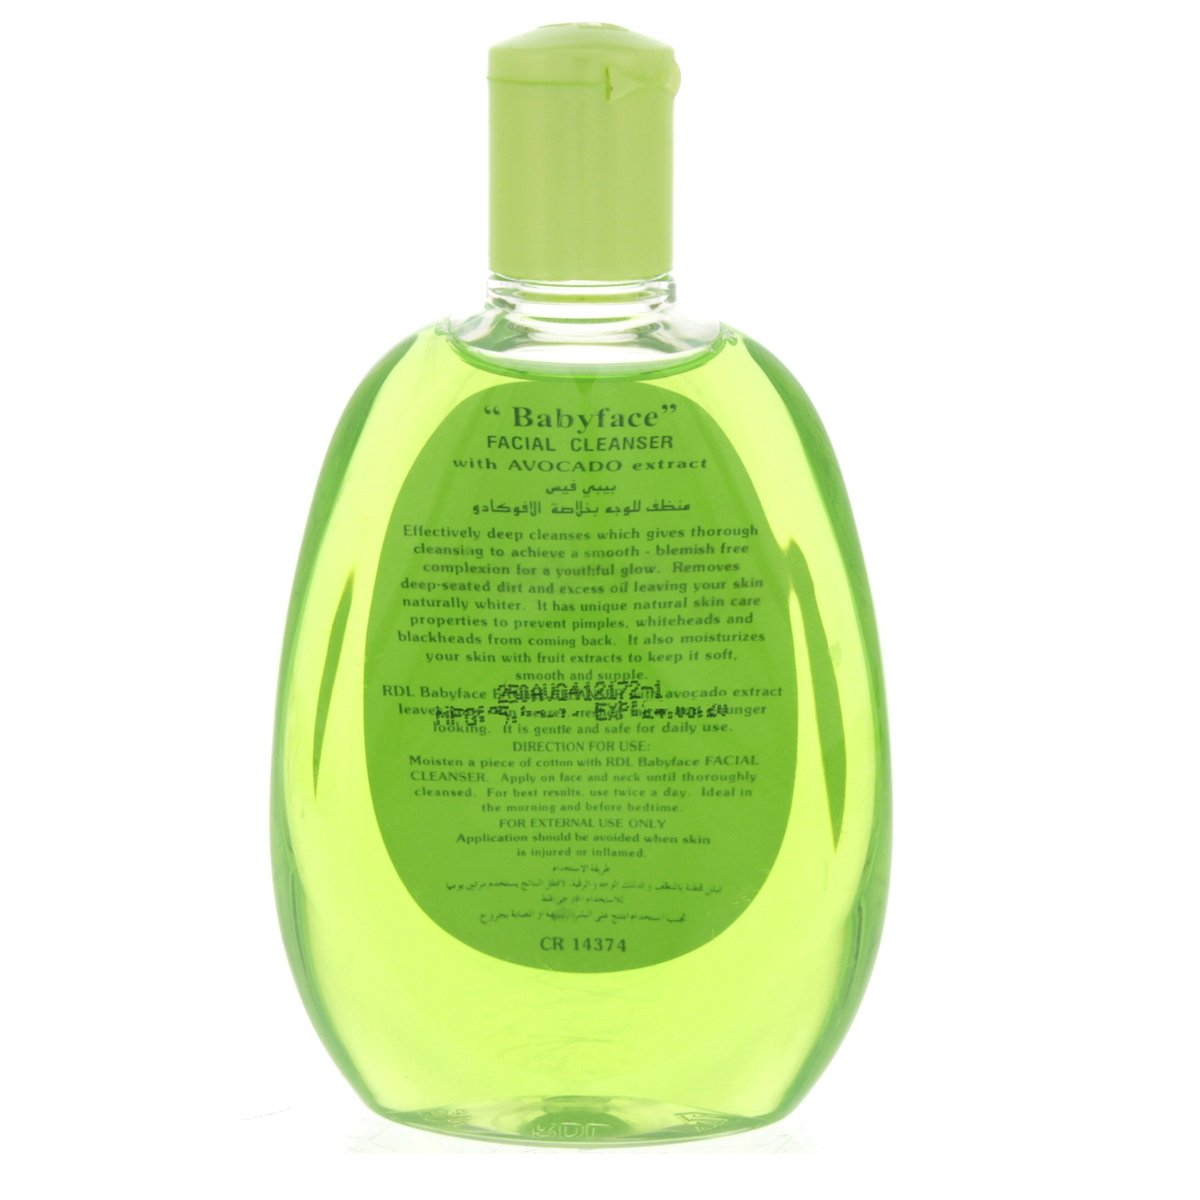 RDL Baby Face Facial Cleanser with Avocado Extract 250 ml